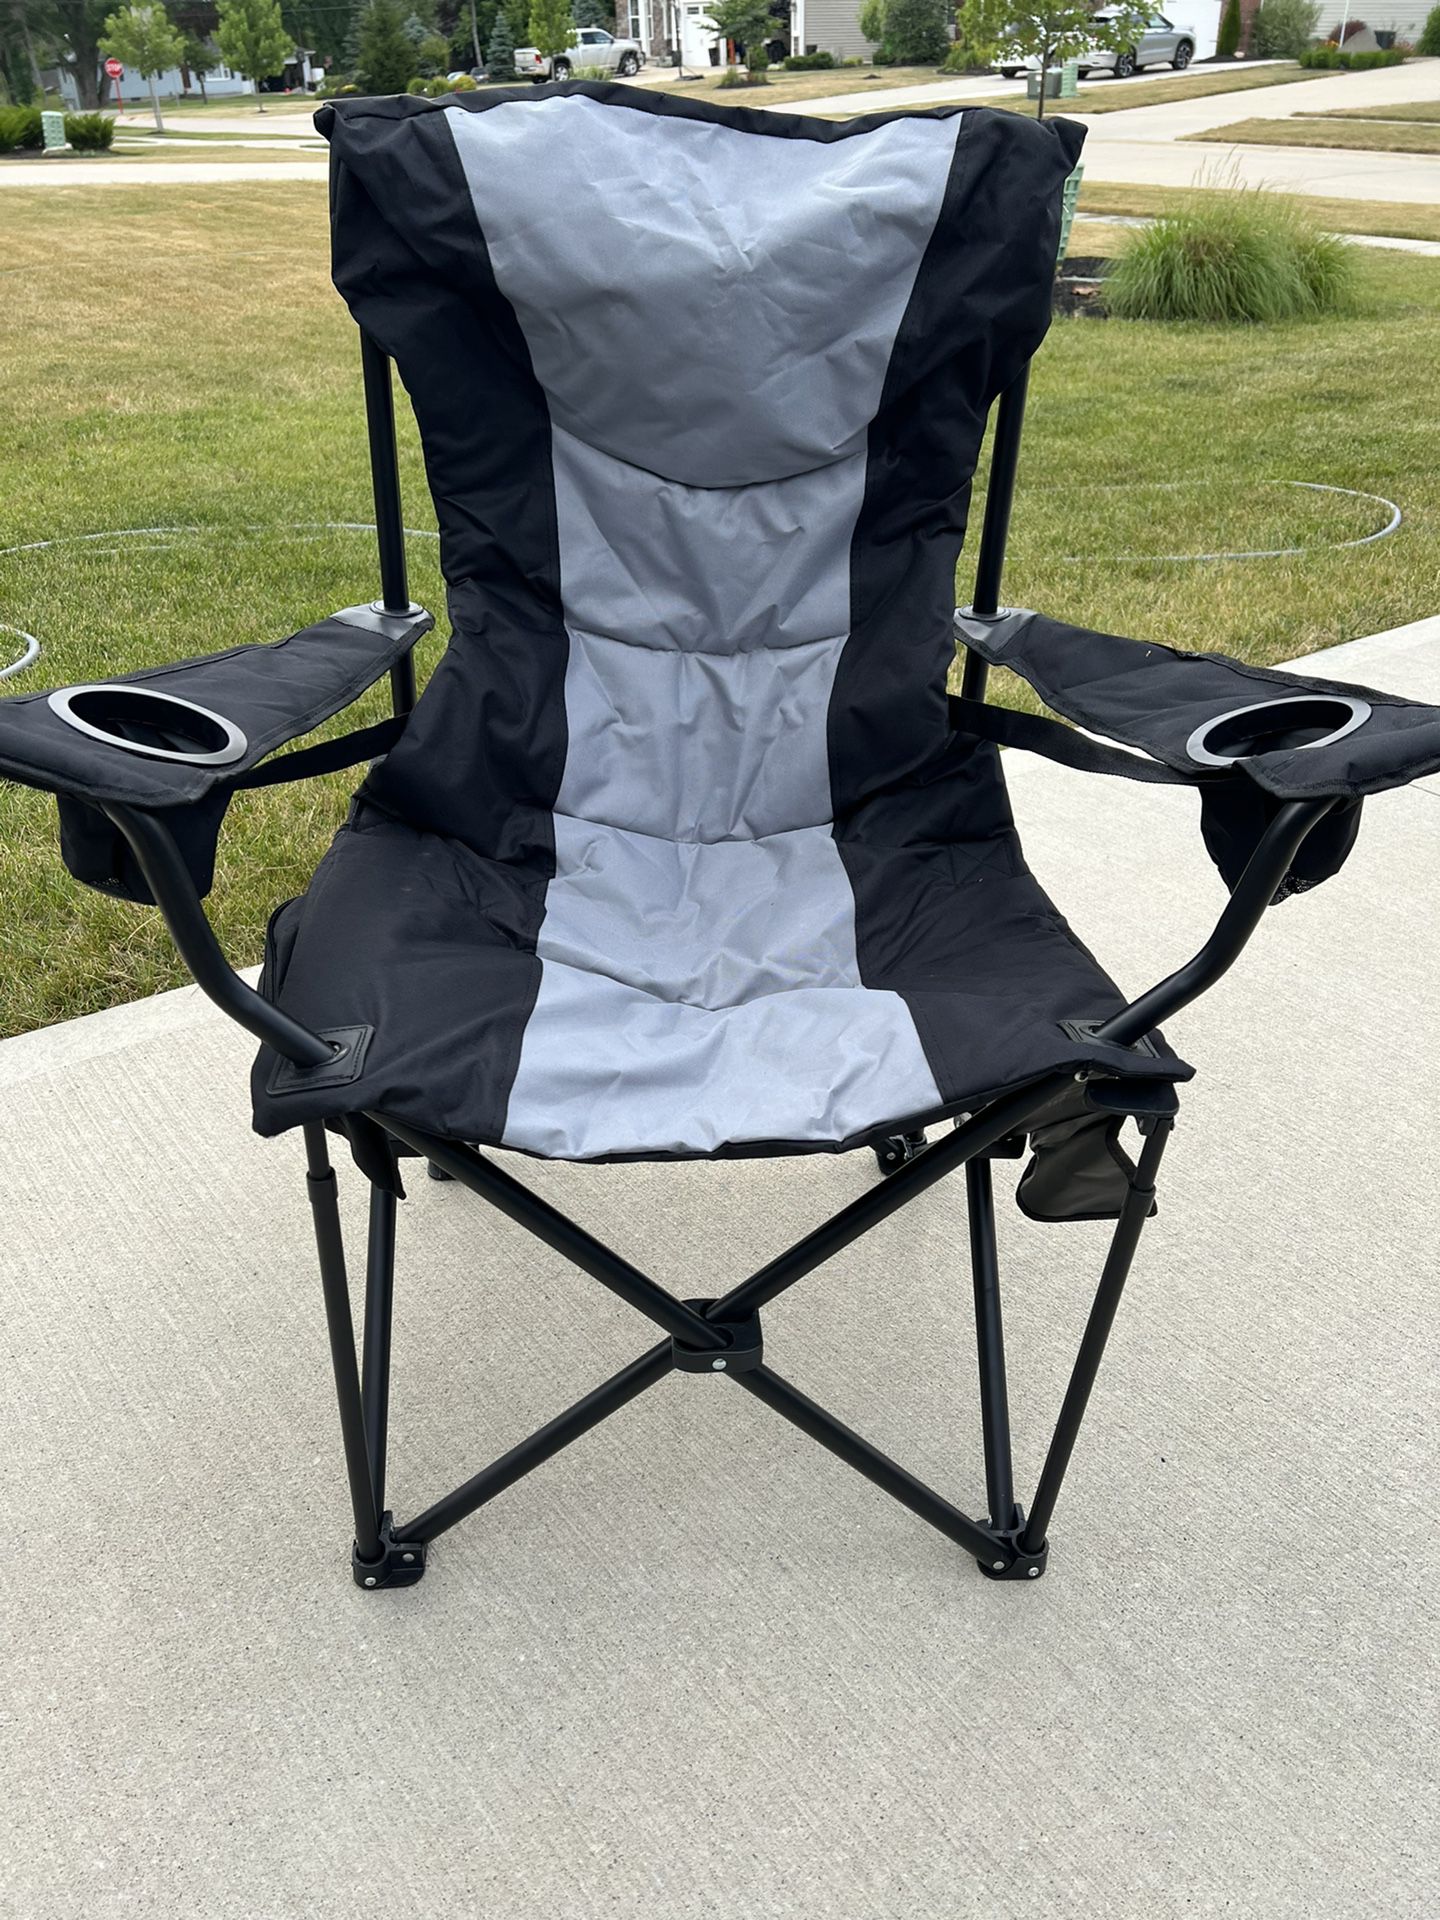 Folding Portable Padded Camping chair